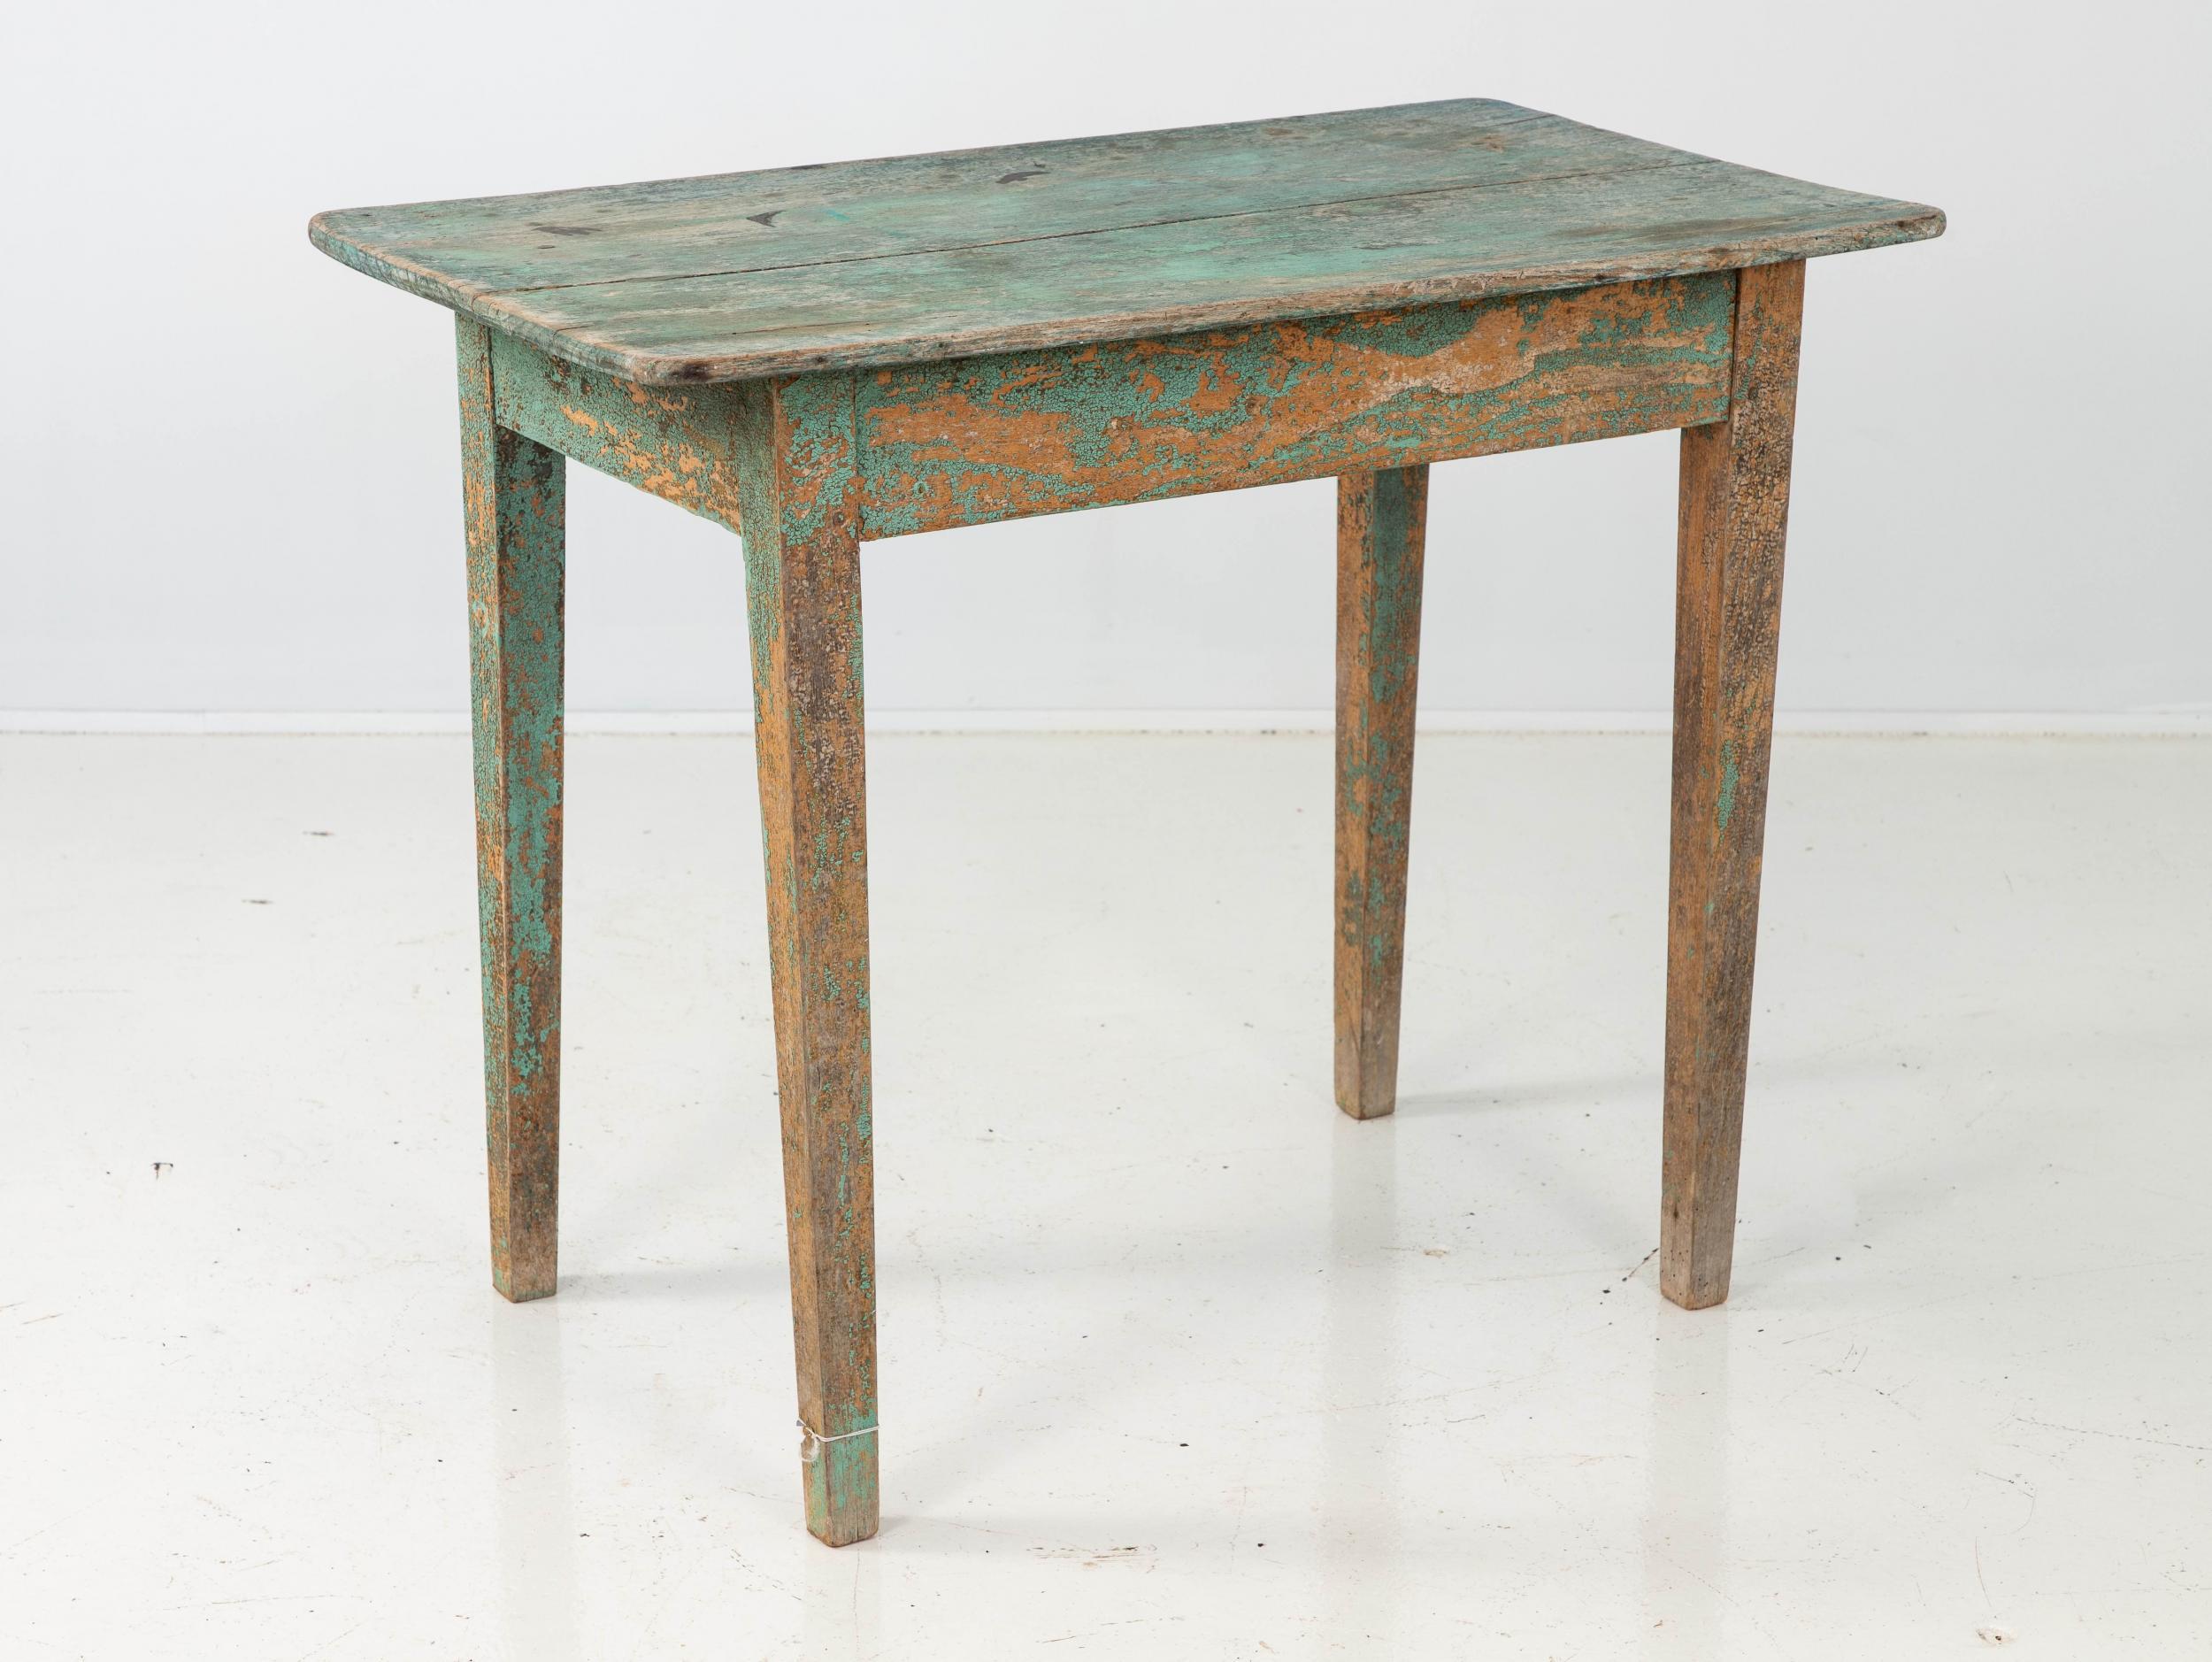 Small Belgian side table in later green paint. Four tapered painted legs. Lovely patina and wear with earlier paints peaking through.